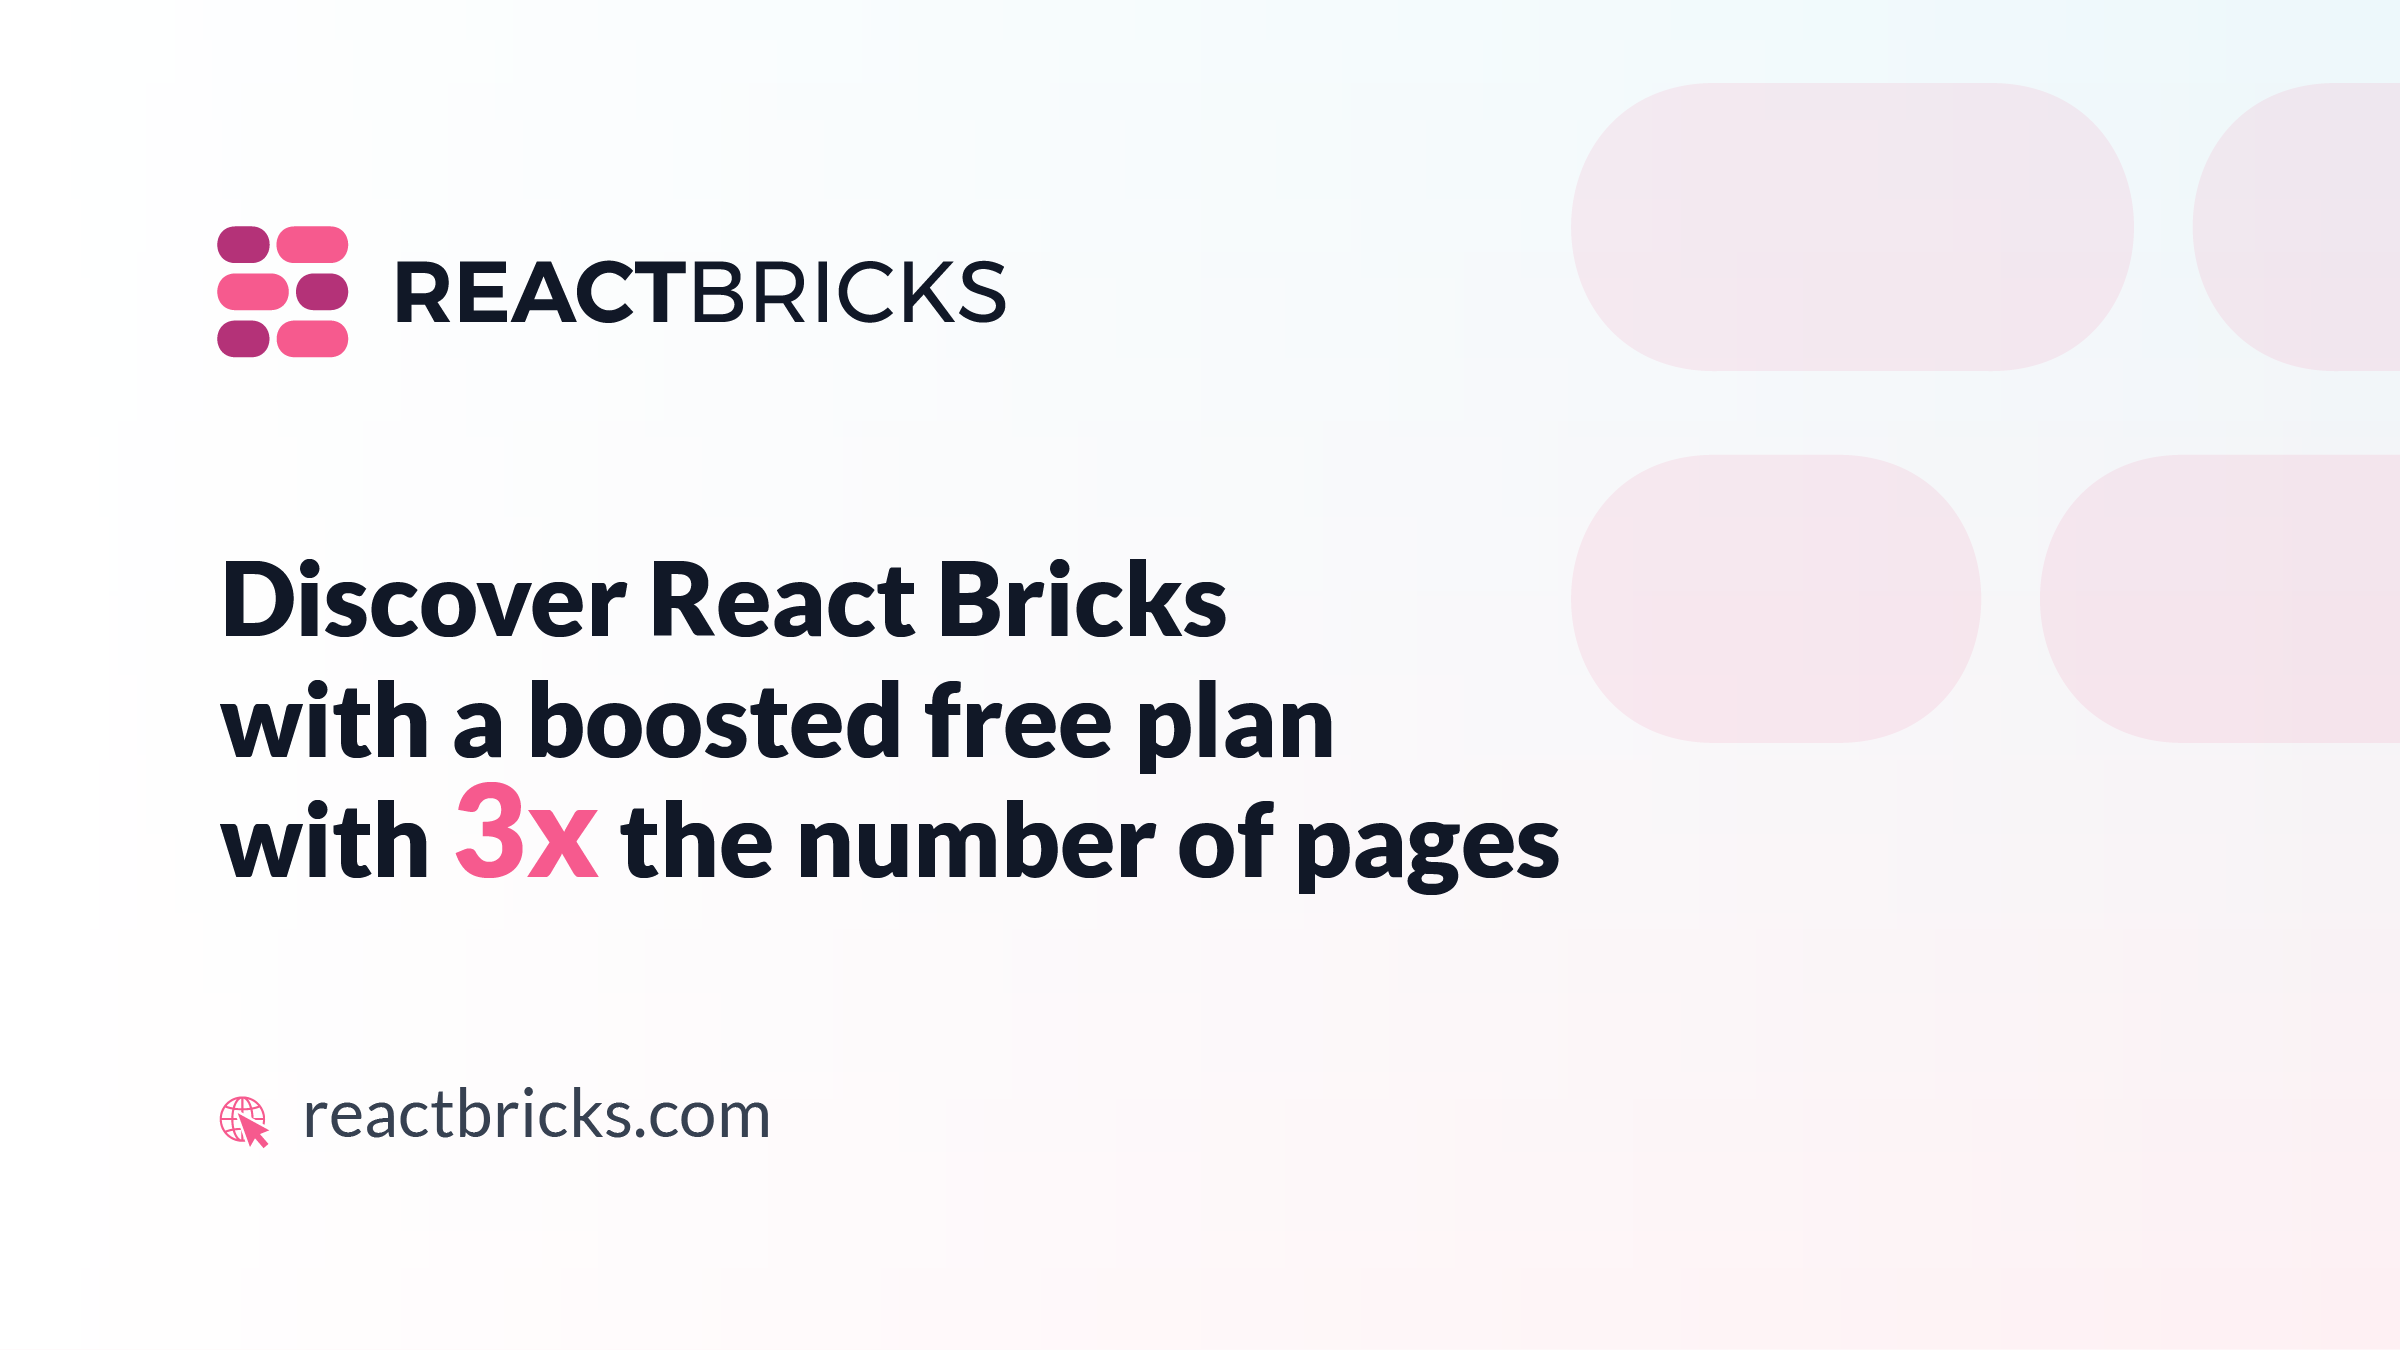 <p>Special offer from React Bricks</p>
